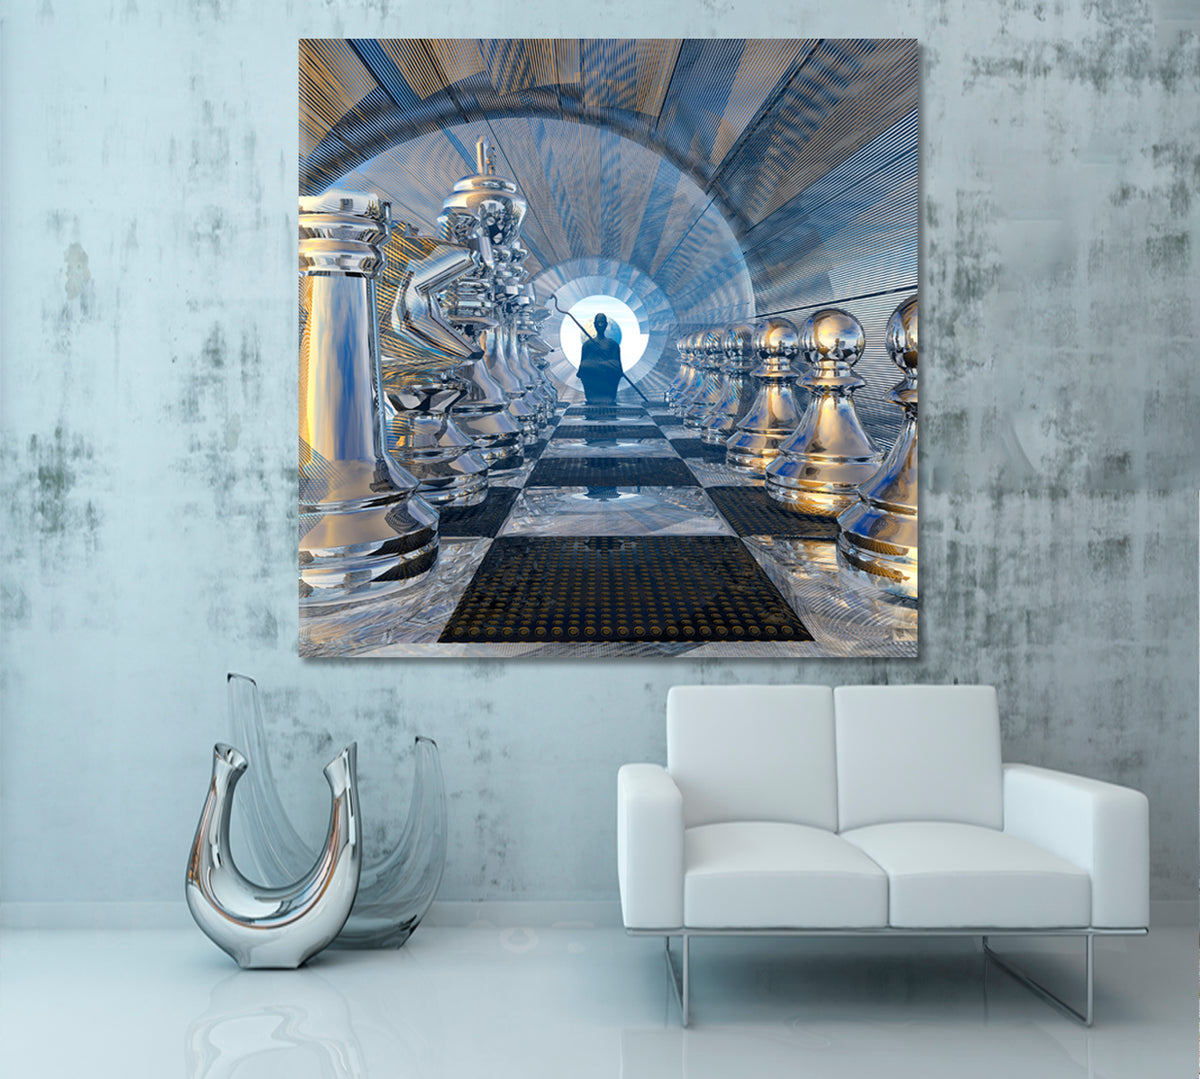 FANTASY Surreal Silent Watcher on the Chessboard Canvas Print - Square Panel Surreal Fantasy Large Art Print Décor Artesty 1 Panel 12"x12" 